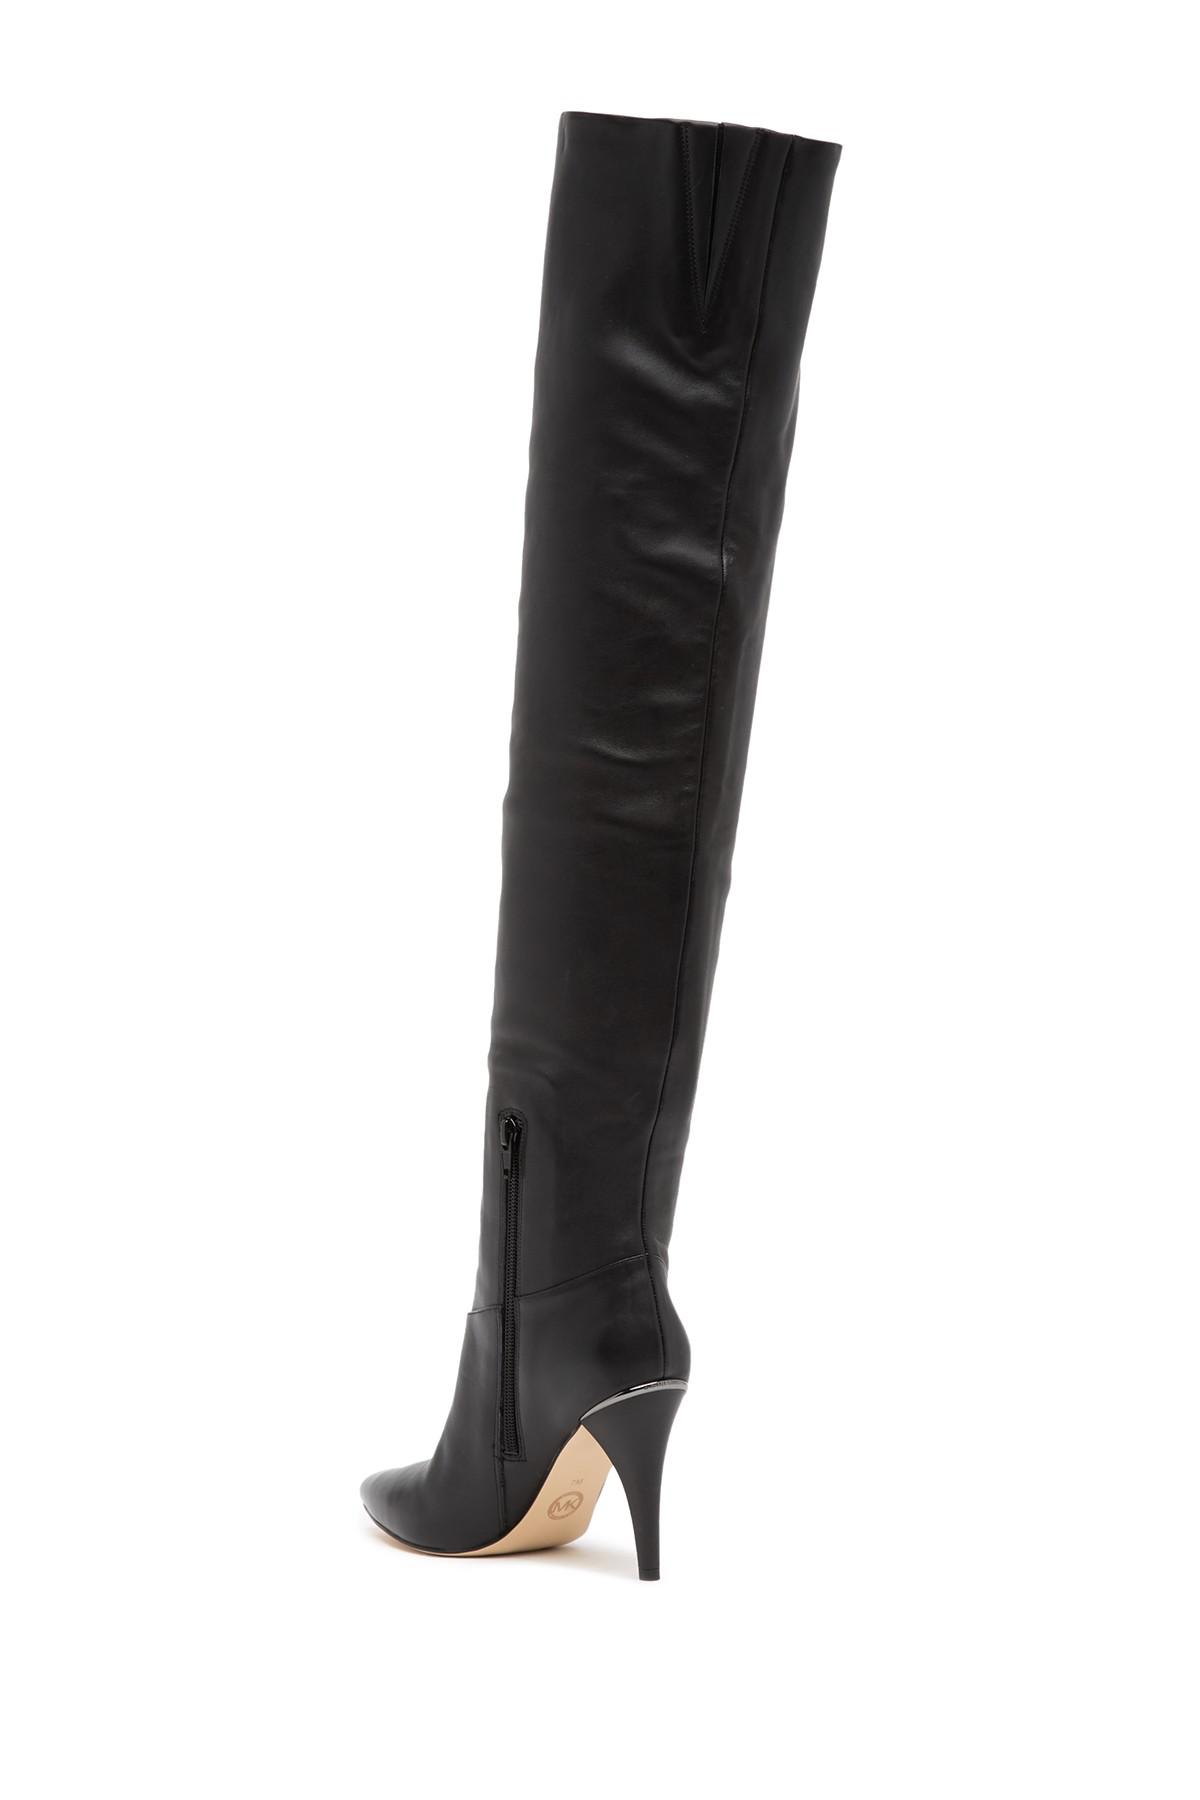 michael kors rosalyn over the knee boots